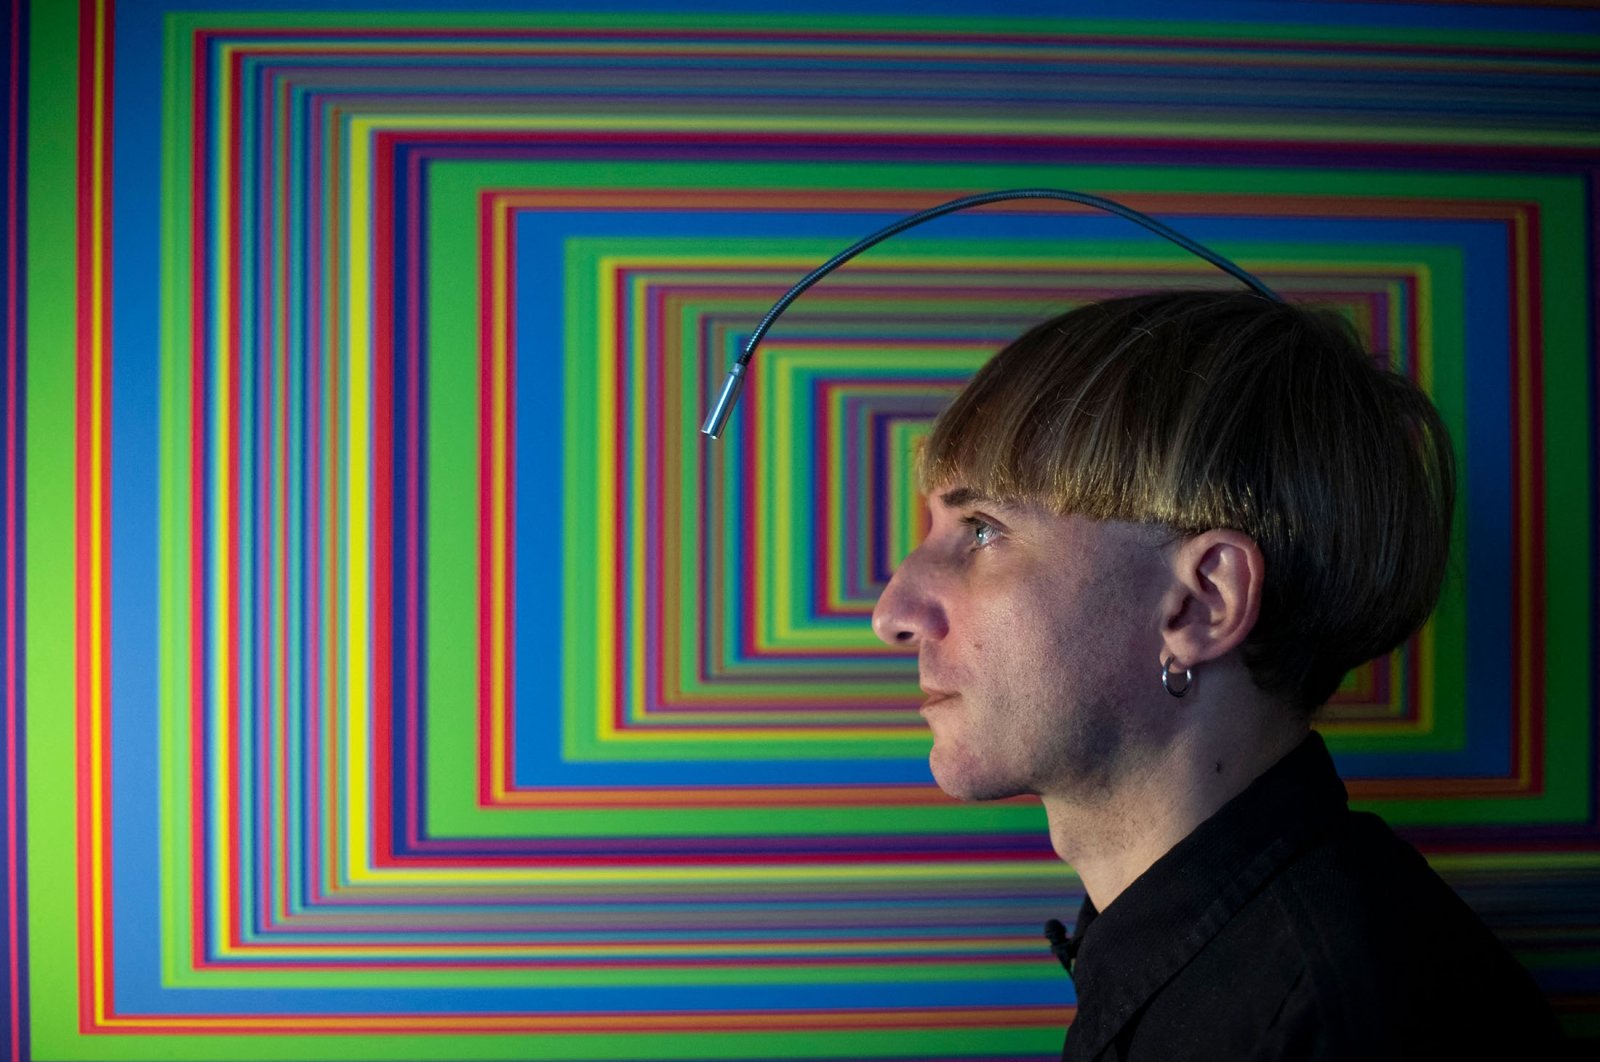 Spanish-born British-Irish “cyborg” artist and activist for transpecies rights, Neil Harbisson, poses for a photo, in Mataro near Barcelona, Spain, Sept. 23, 2021. (AFP Photo)